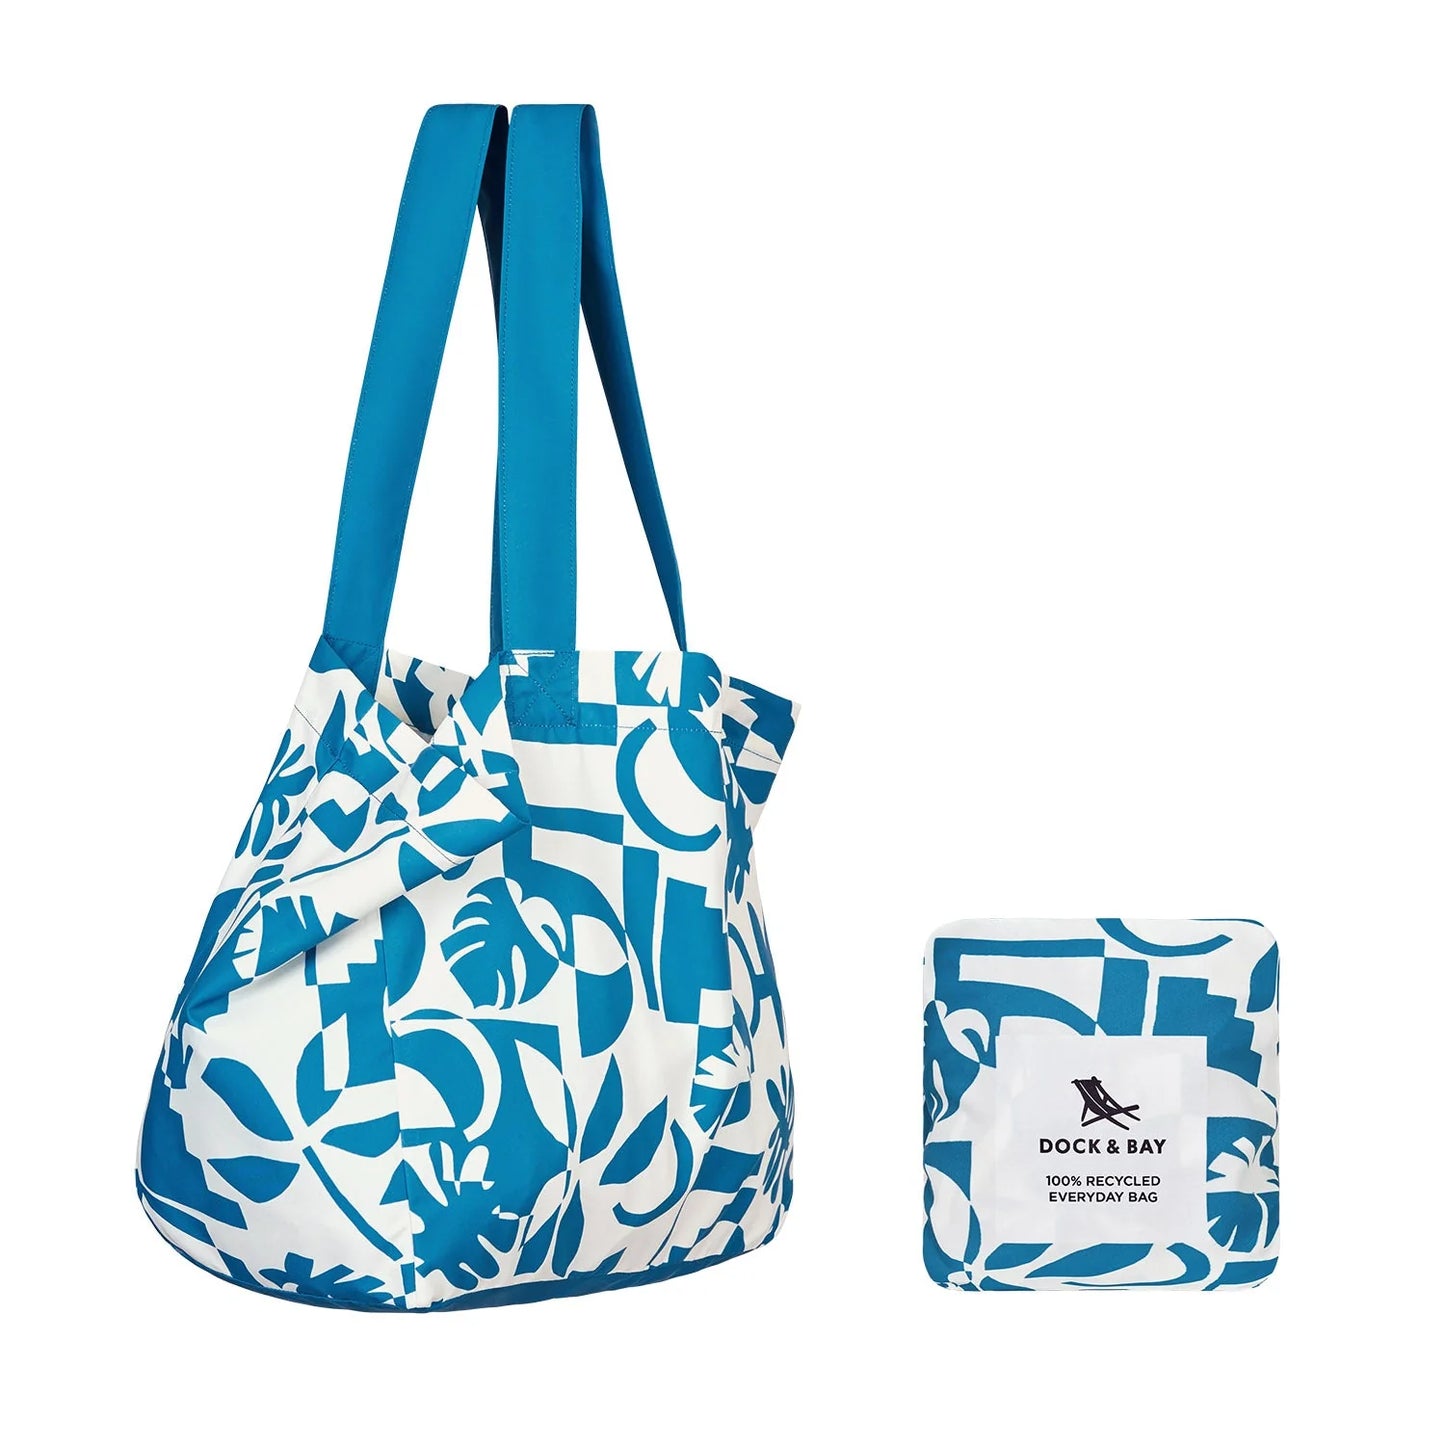 Dock and Bay Everyday Tote Bag